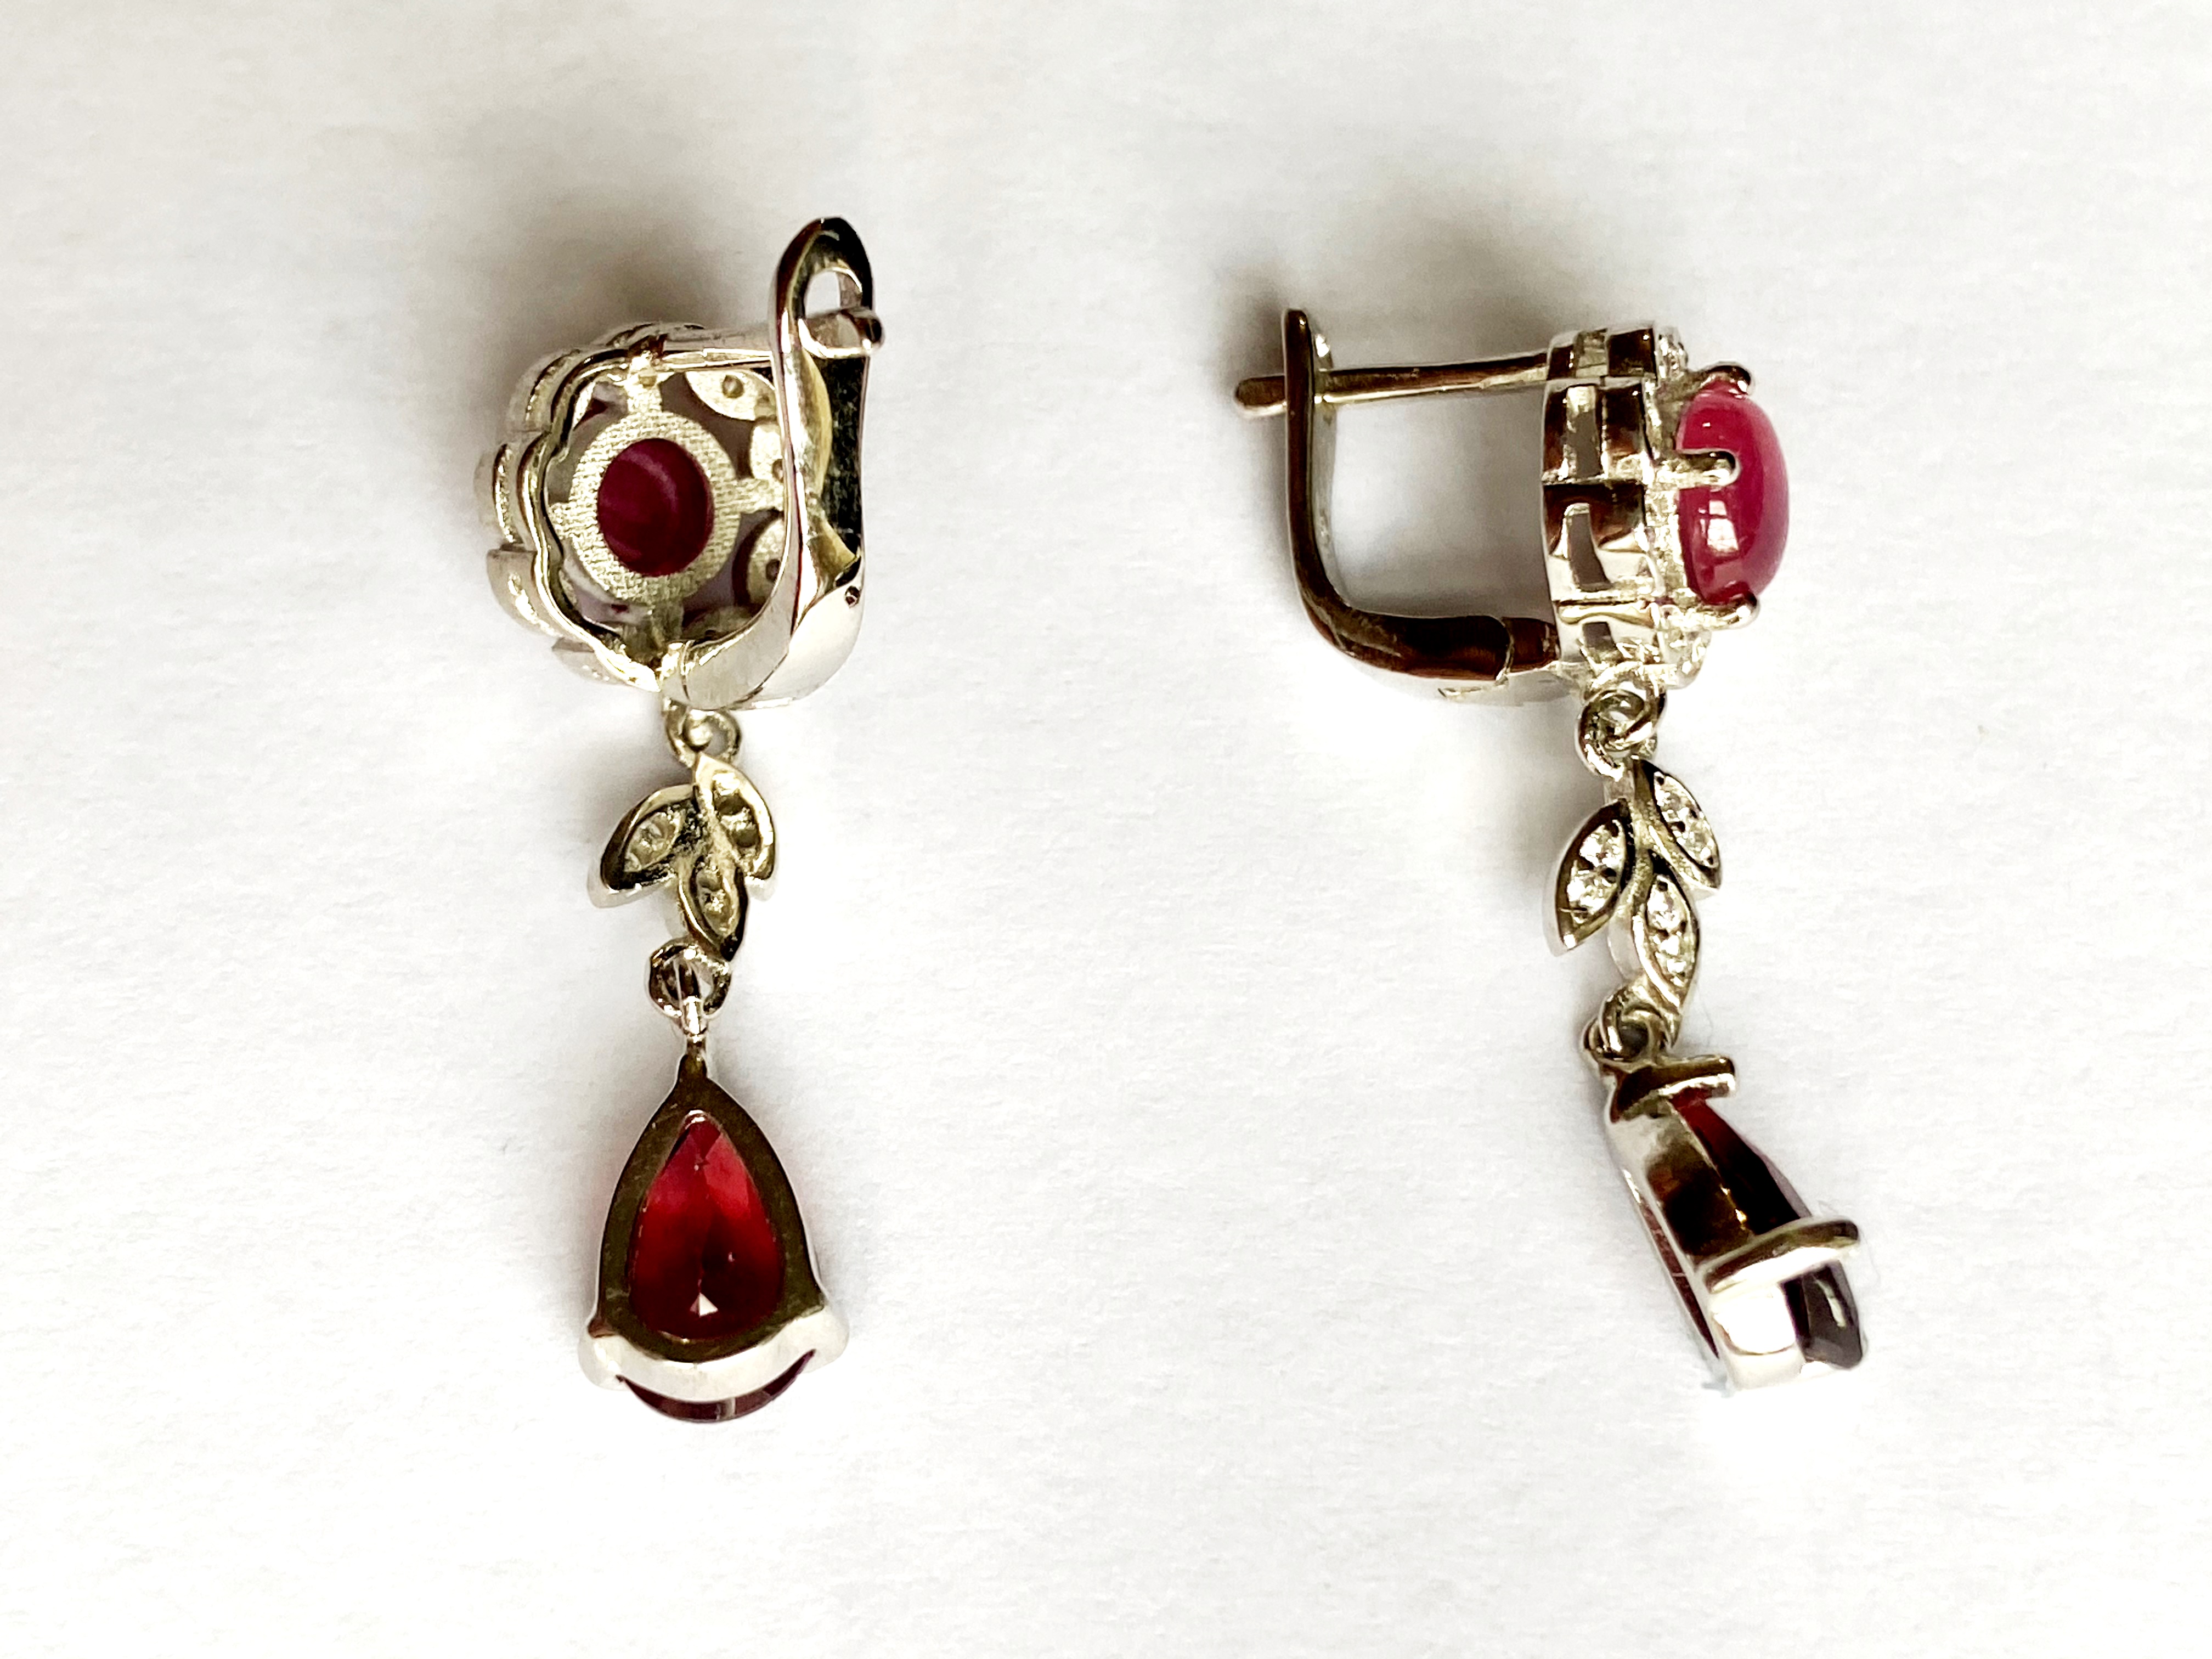 A pair 925 silver drop earrings set with cabochon cut rubies and pear cut garnets, L. 3.2cm. - Image 2 of 2